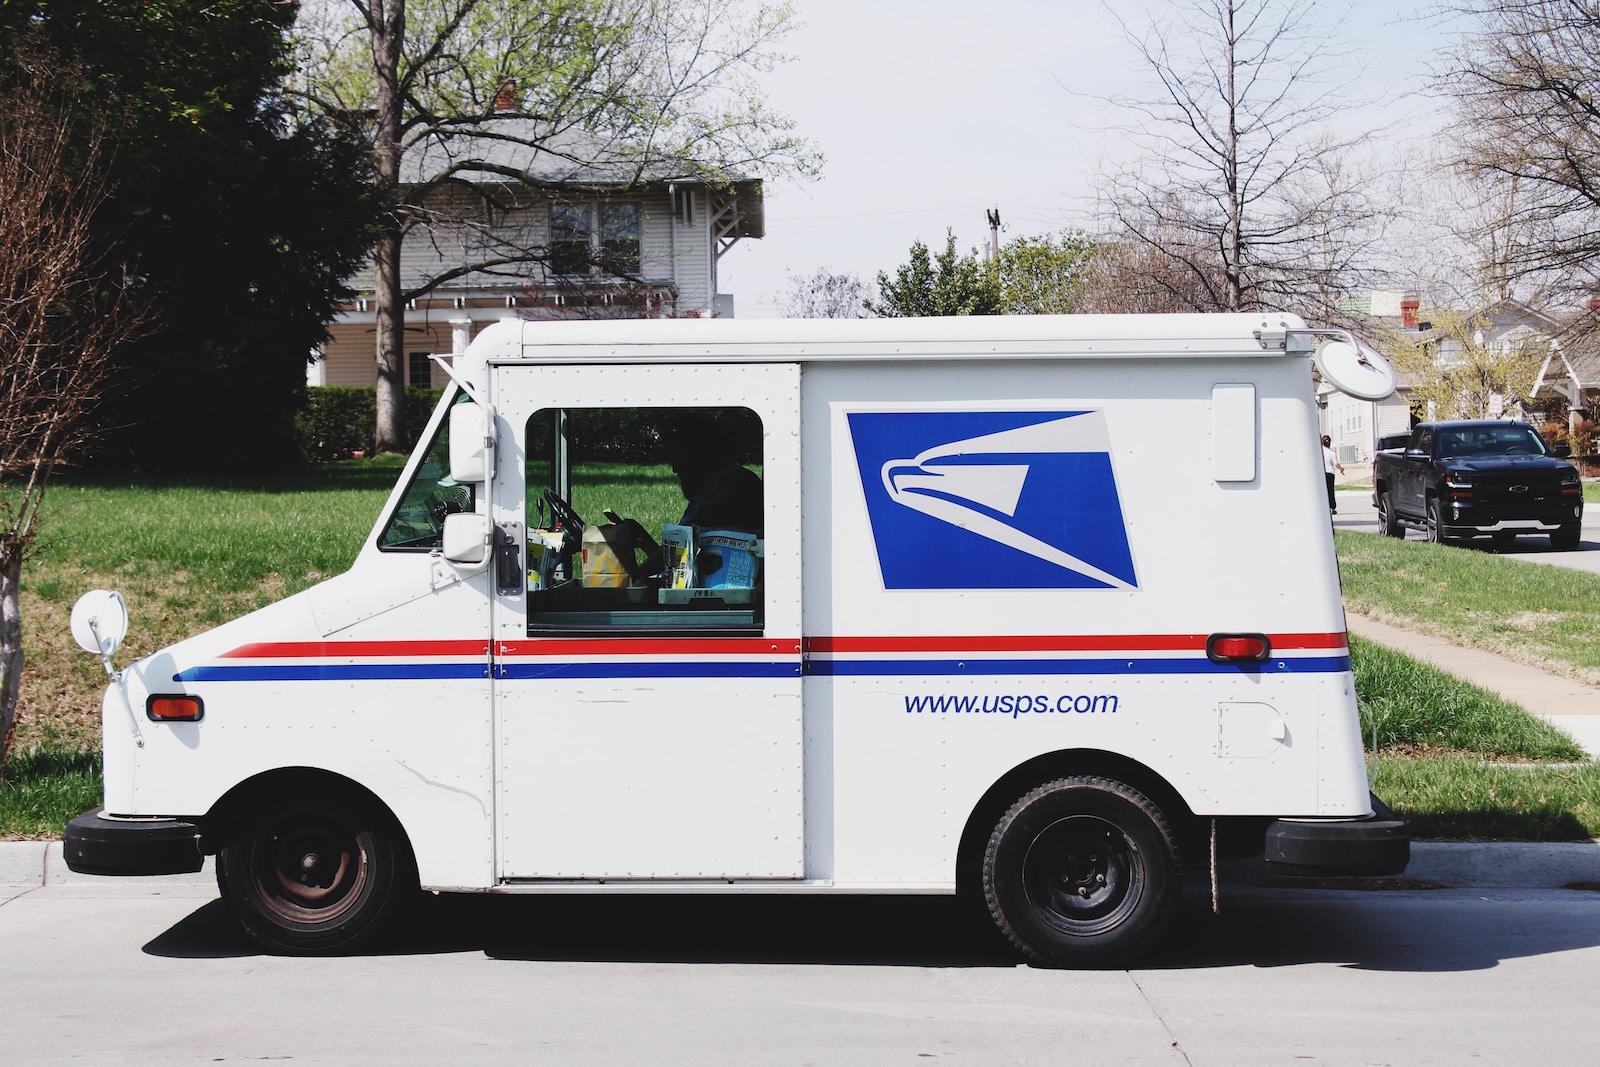 mail theft